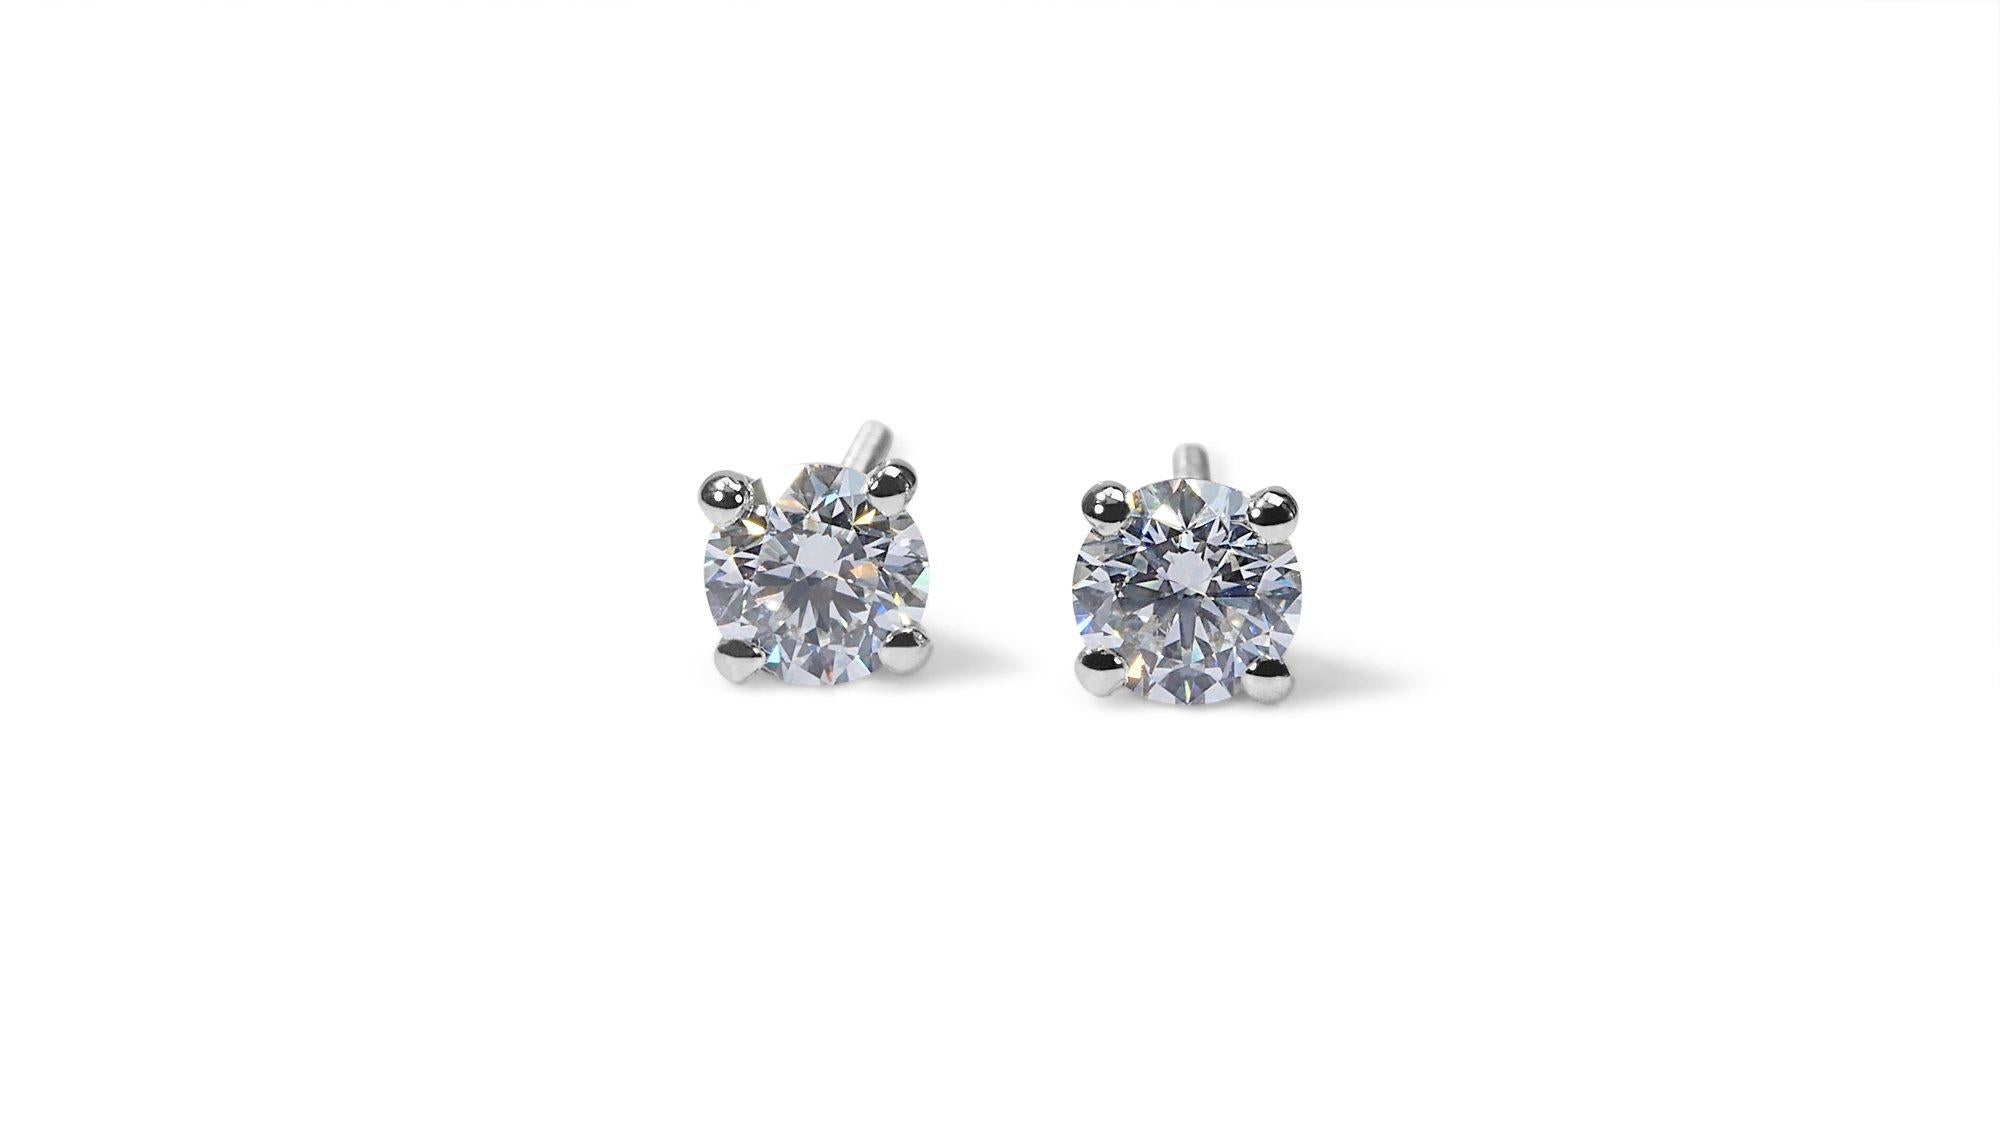 Gorgeous 18k White Gold Stud Earrings with 0.80 ct Natural Diamonds GIA Cert For Sale 1